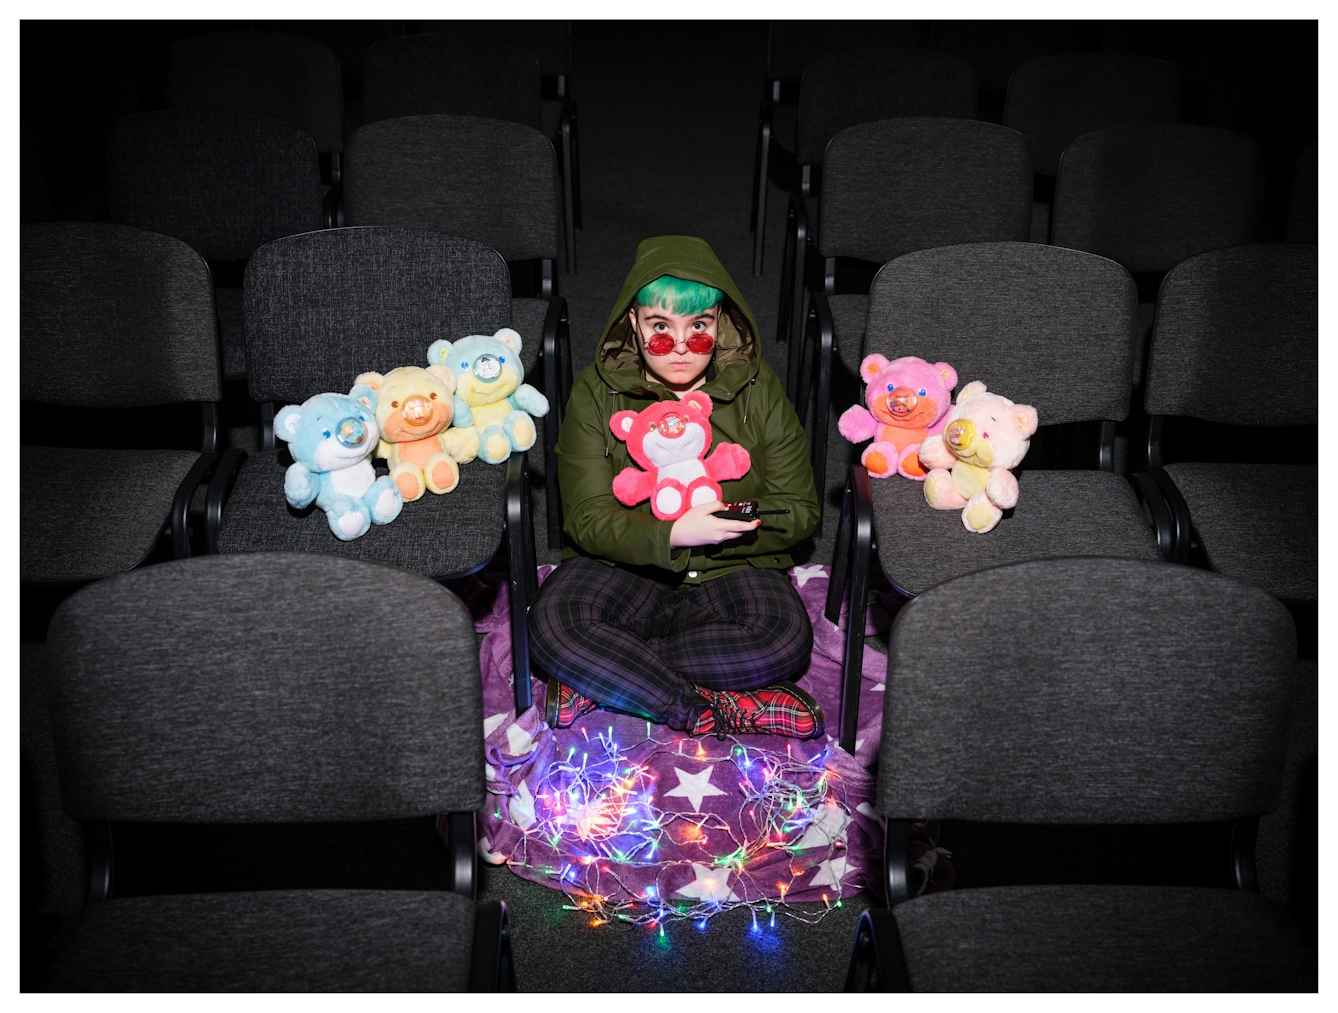 Assisted Self-Portrait of an individual sat crossed legged on the floor of a dark conference room surrounded by grey chairs. They are wearing a green coat with he hood up, have green hair and are wearing rose coloured glasses which they are peering over the top of. In their arms they are cradling a bright red Nosy Bear and on the chairs either side of them are 5 further splashes of colour in the form of other Nosy Bears. They are surrounded by colourful fairy lights and in her right hand is the remote trigger used to capture the image.